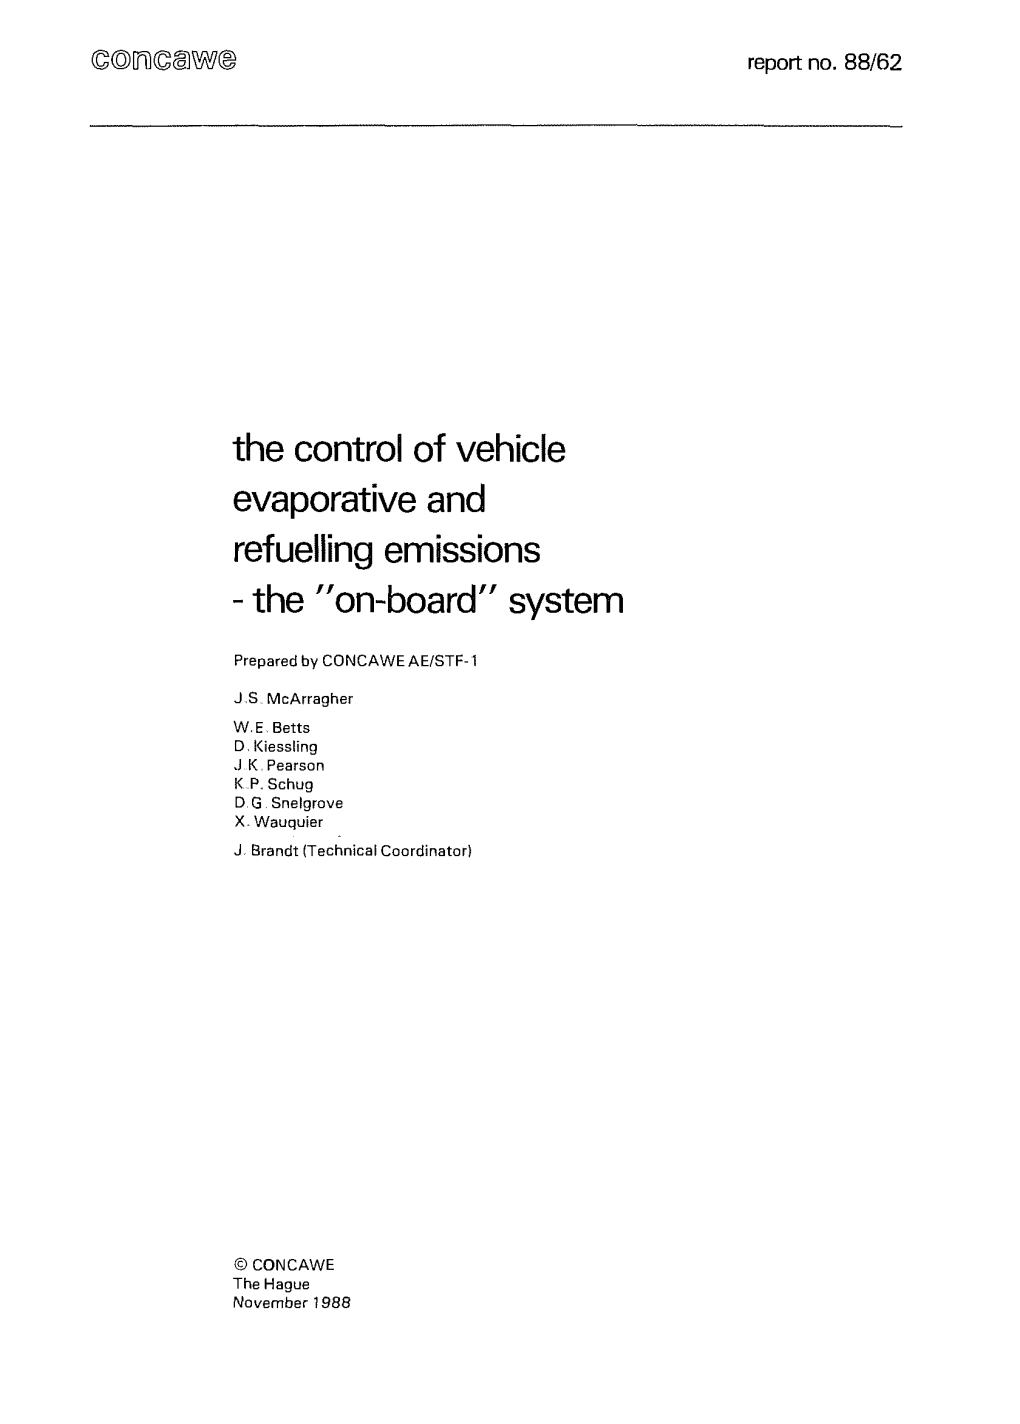 The Control of Vehicle Evaporative and Refuelling Emissions - the Ffon-Board" System